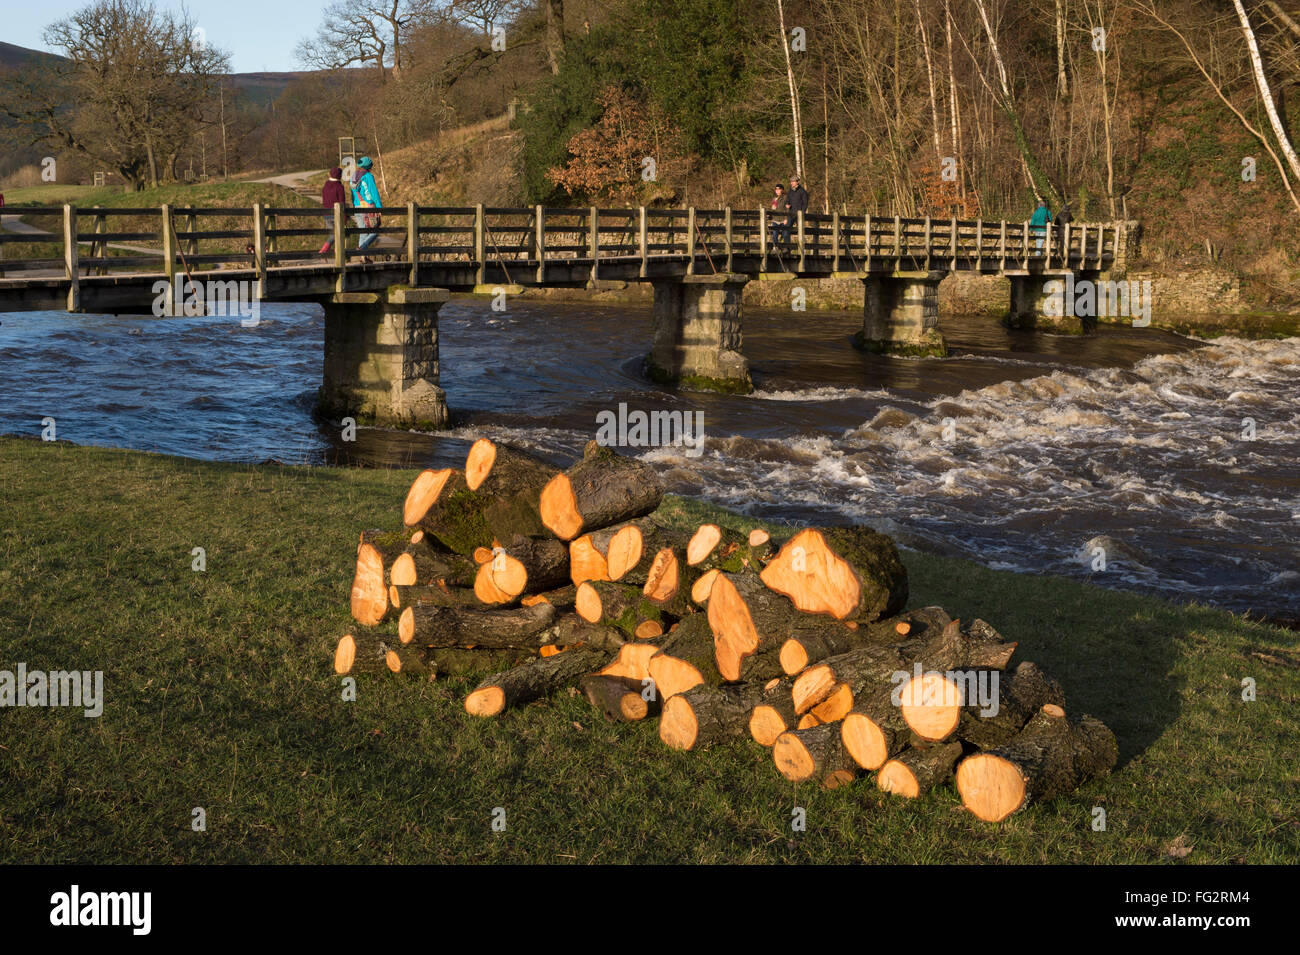 On a sunny day, people are crossing the footbridge over the River Wharfe, Bolton Abbey, North Yorkshire, England, UK - pile of logs in the foreground. Stock Photo